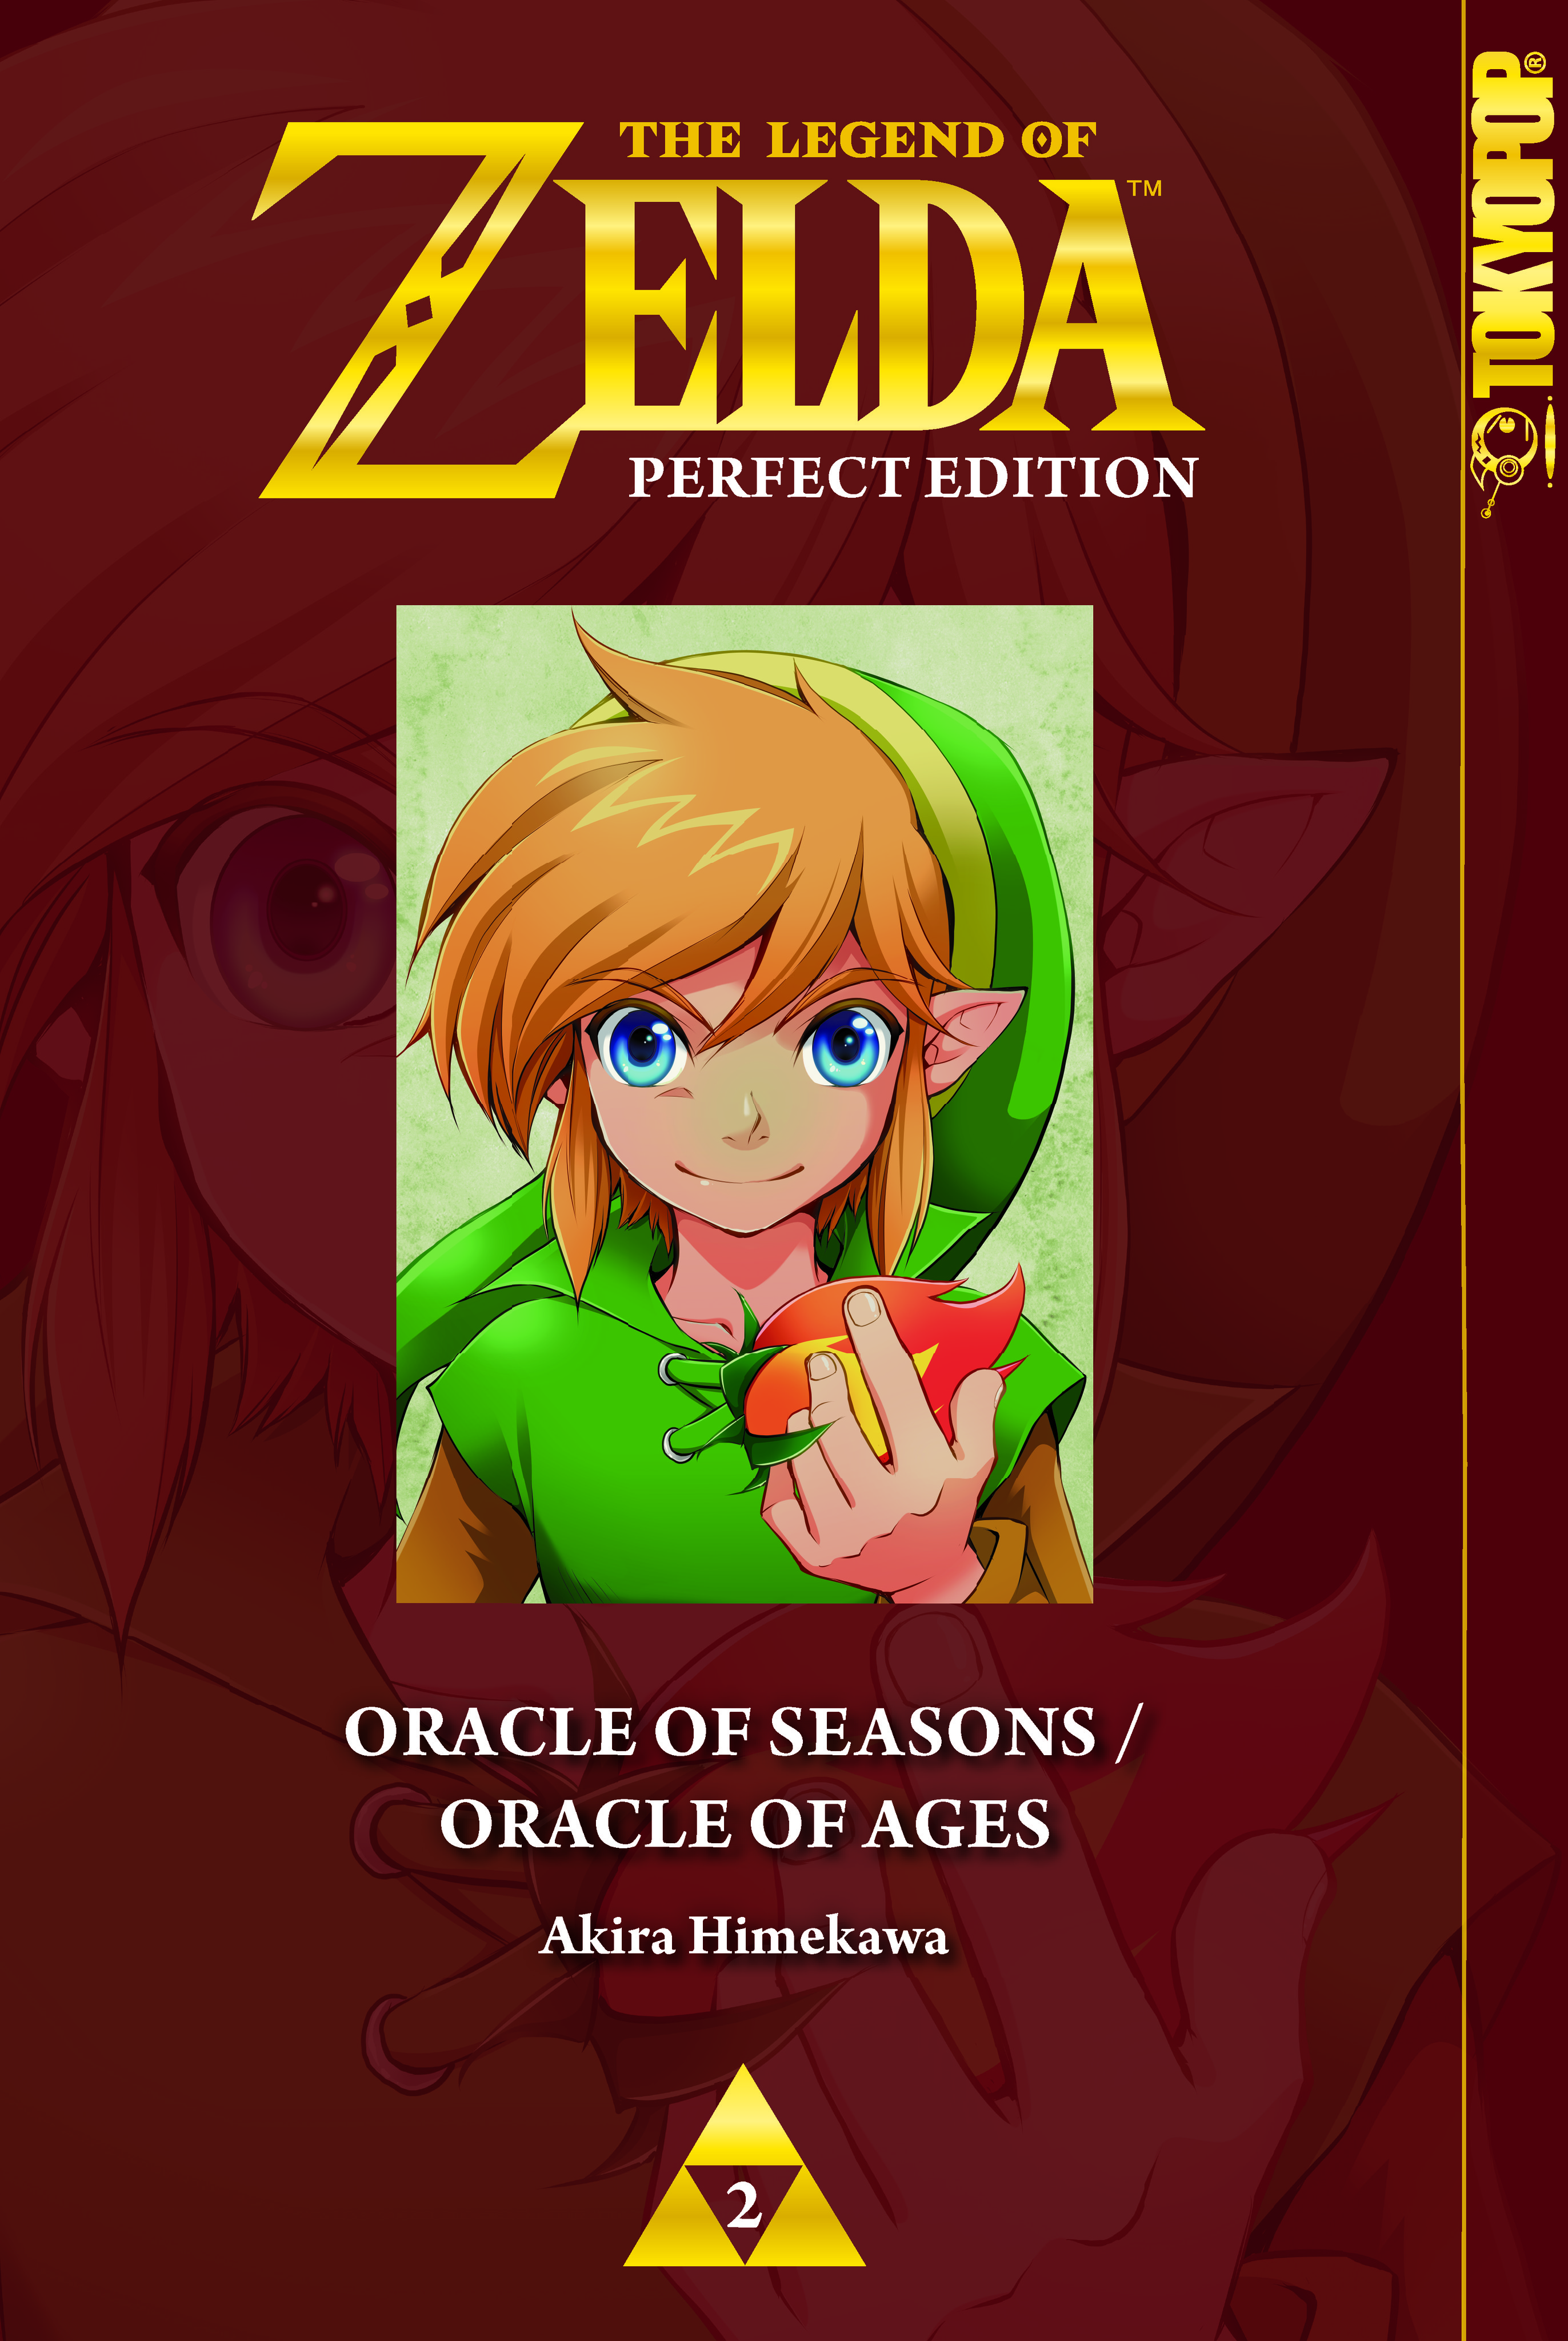 Perfect edition. The Legend of Zelda Oracle of Seasons. Oracle of Seasons. Link Oracle of ages.